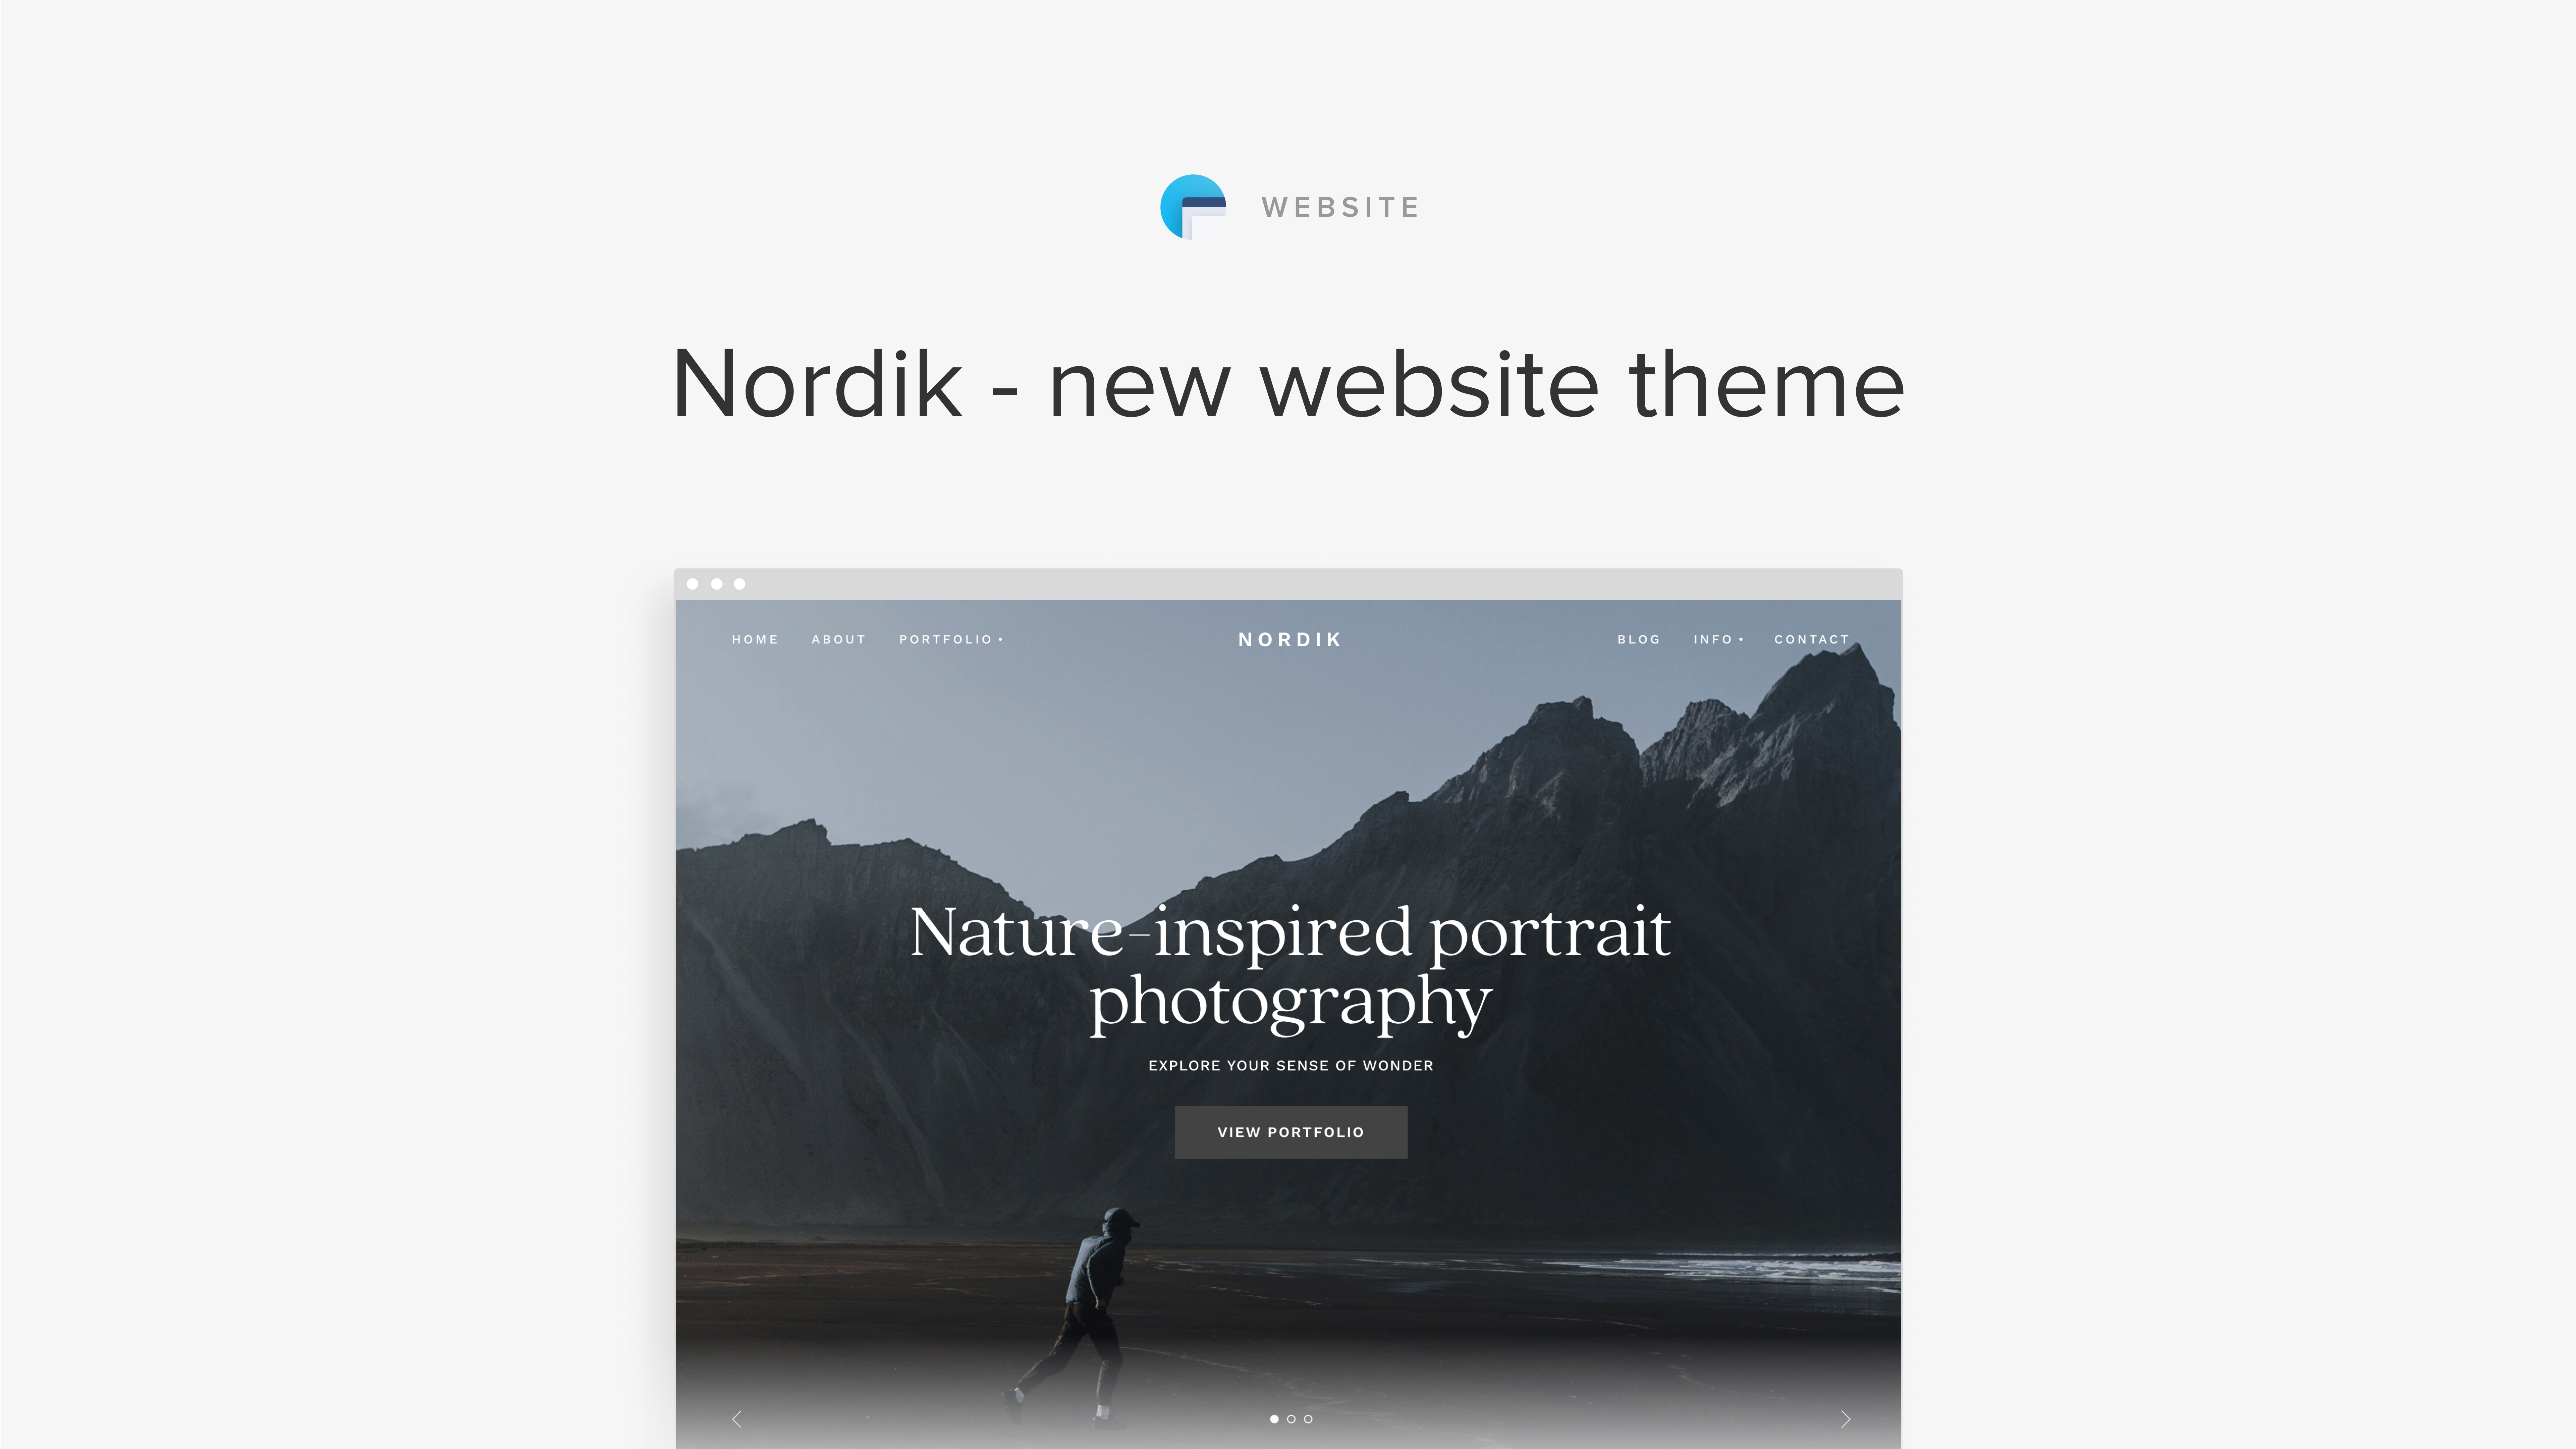 Showing a header example of the Nordik website.